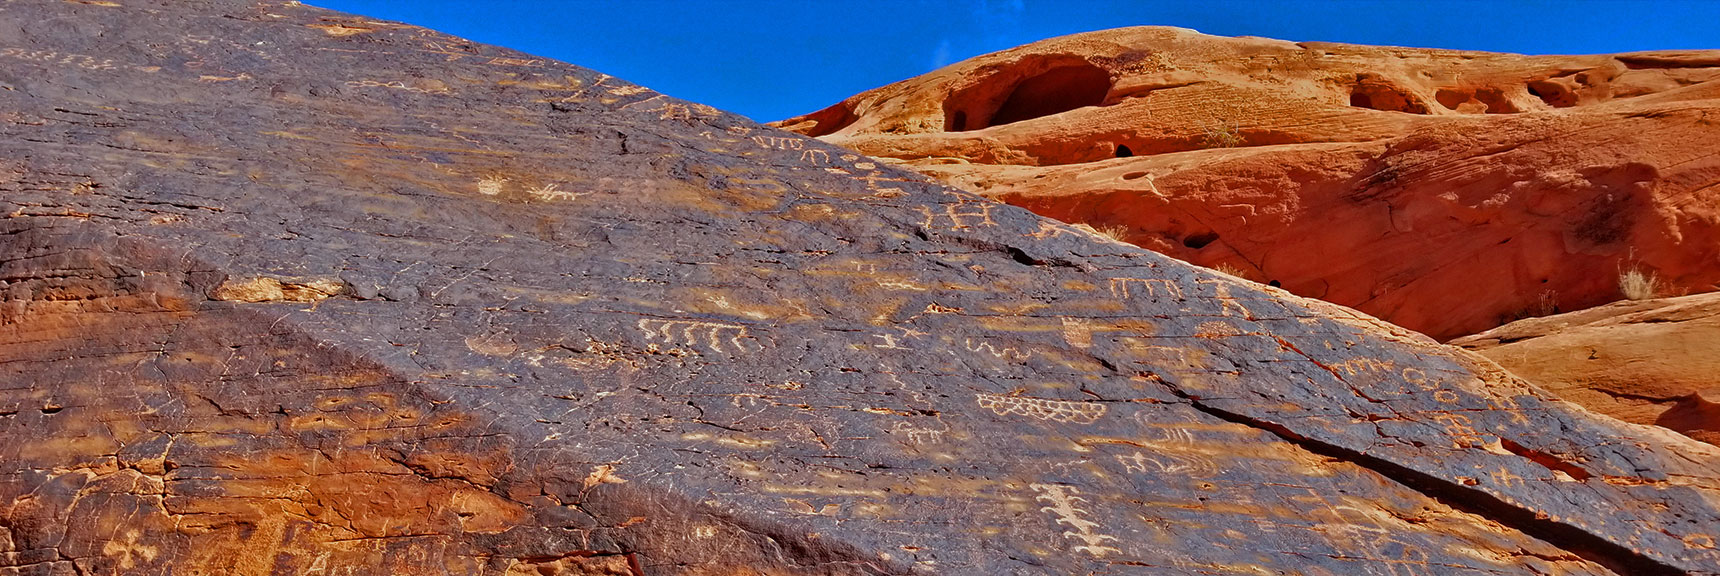 Petroglyphs on Mouse's Tank Trail in Valley of Fire State Park, Nevada, Slide 7